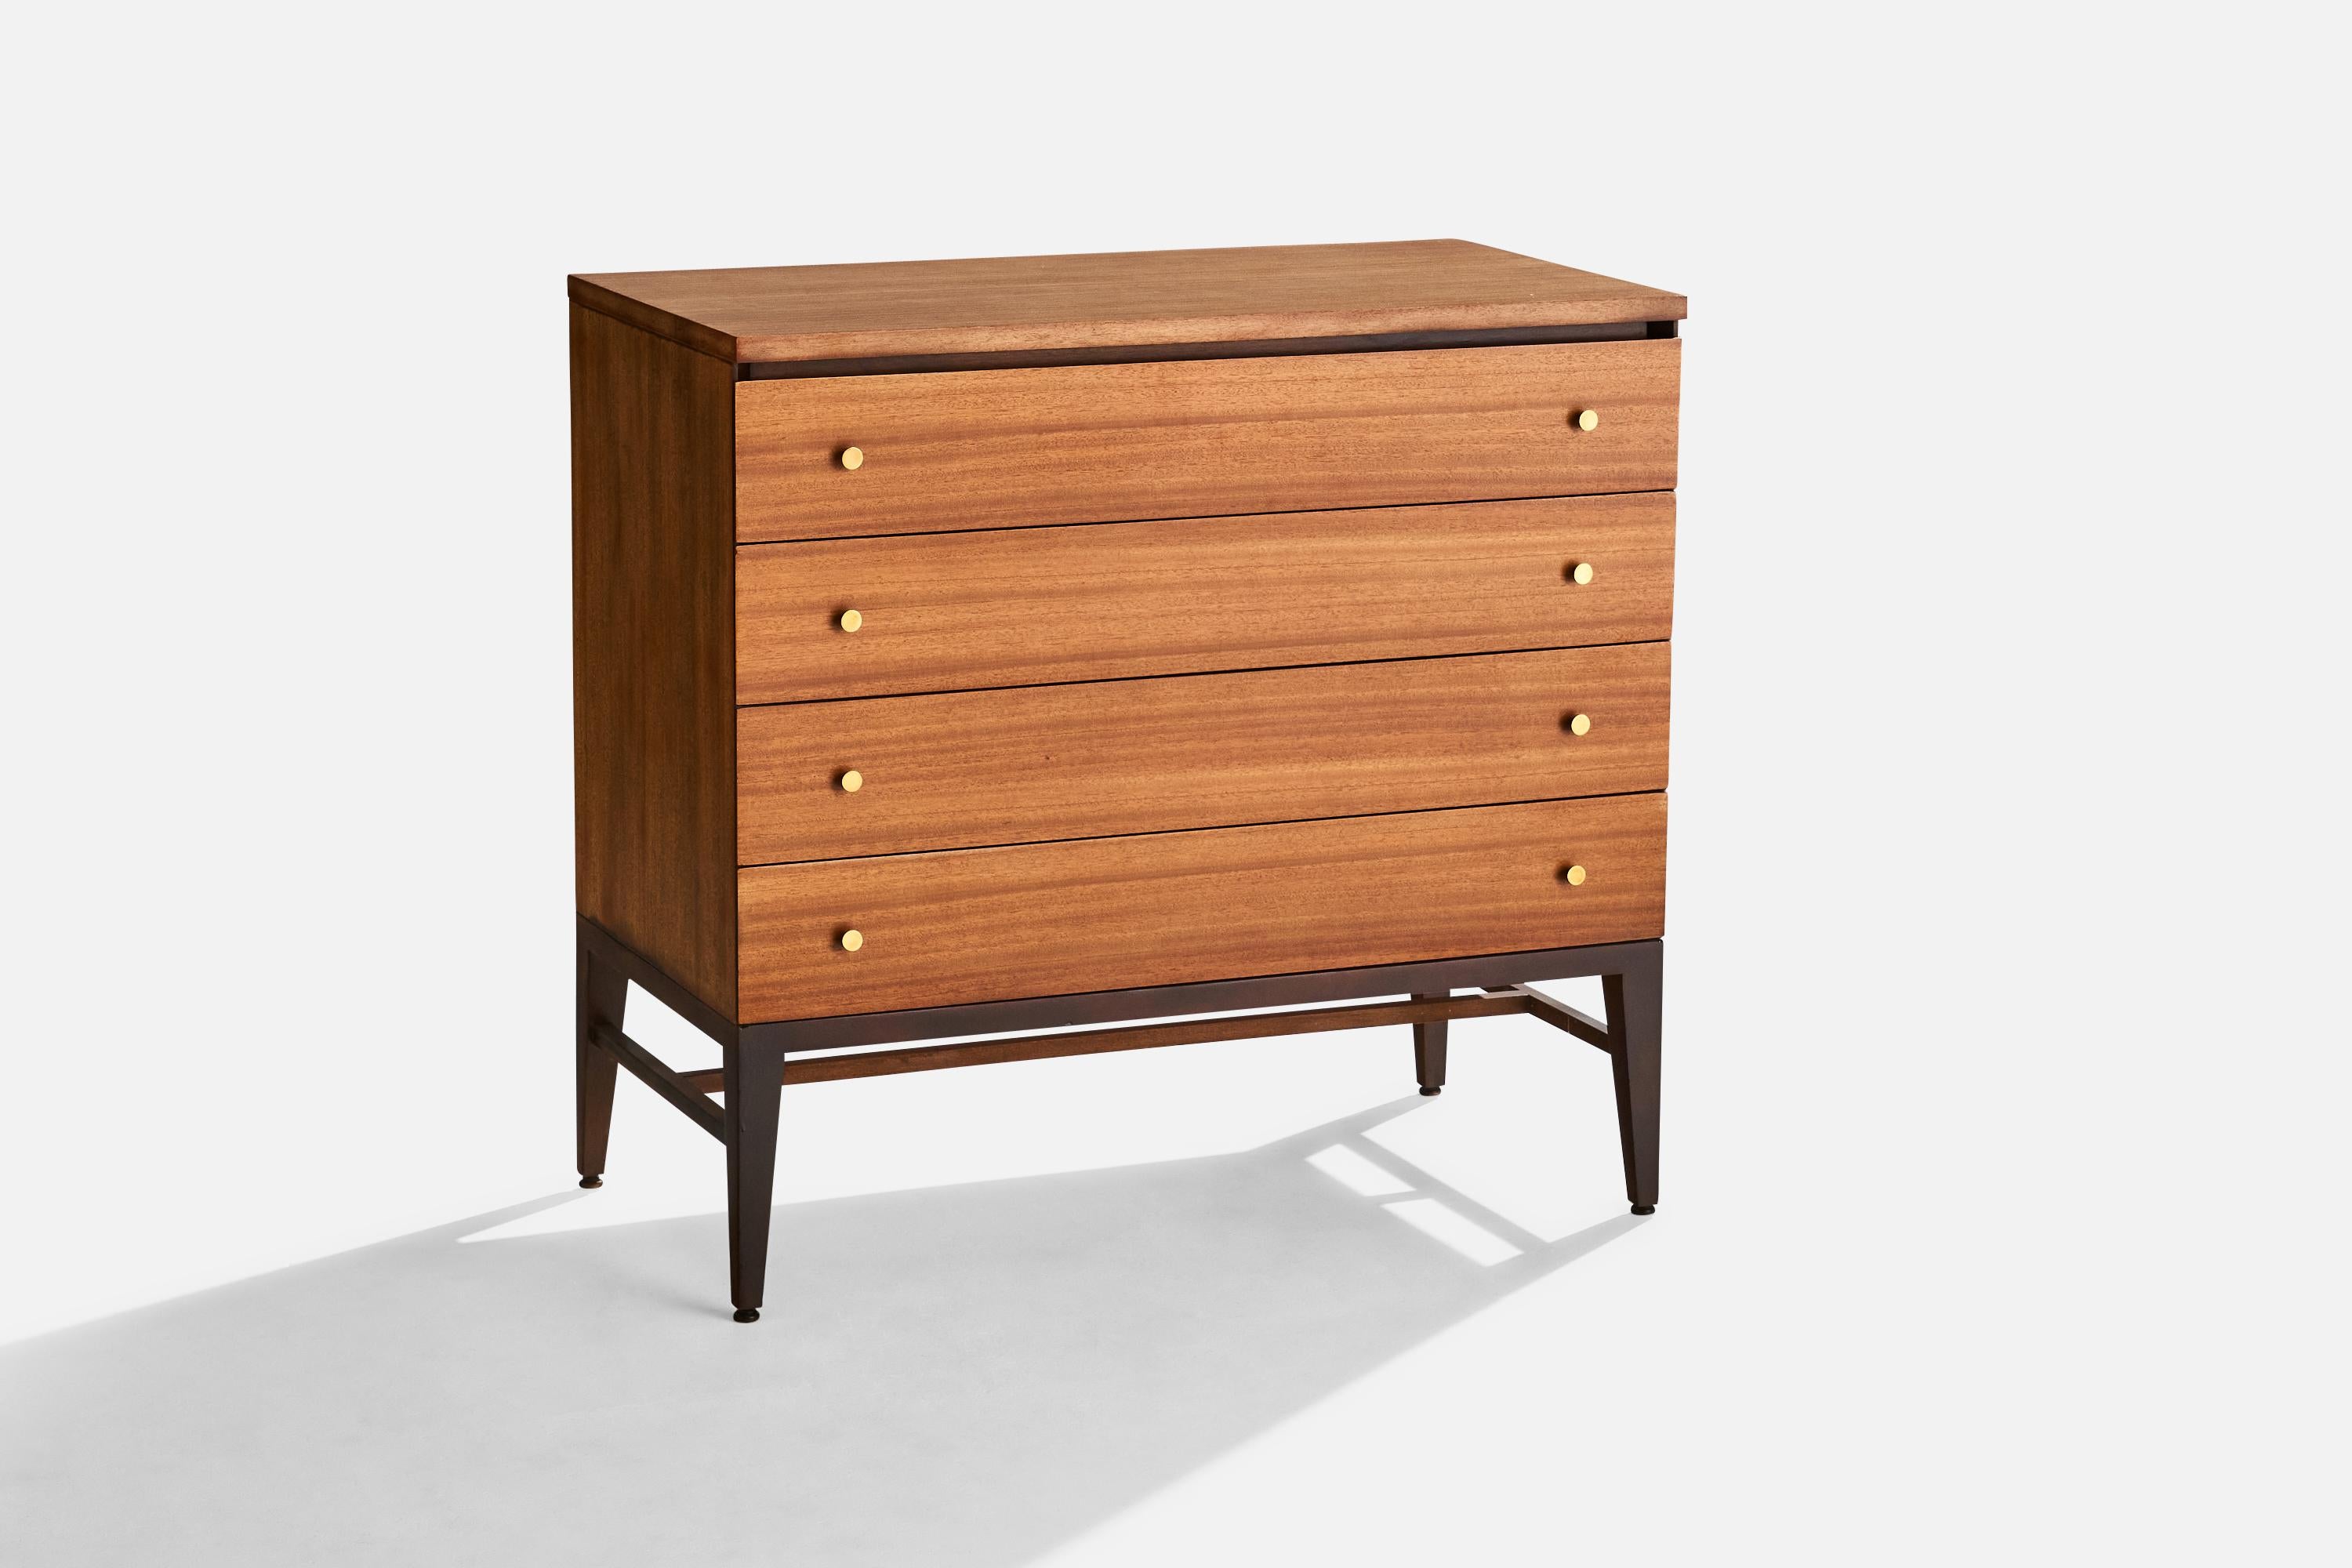 A brass and mahogany chest of drawers designed by Paul McCobb and produced by Calvin Furniture, USA, c. 1960s.